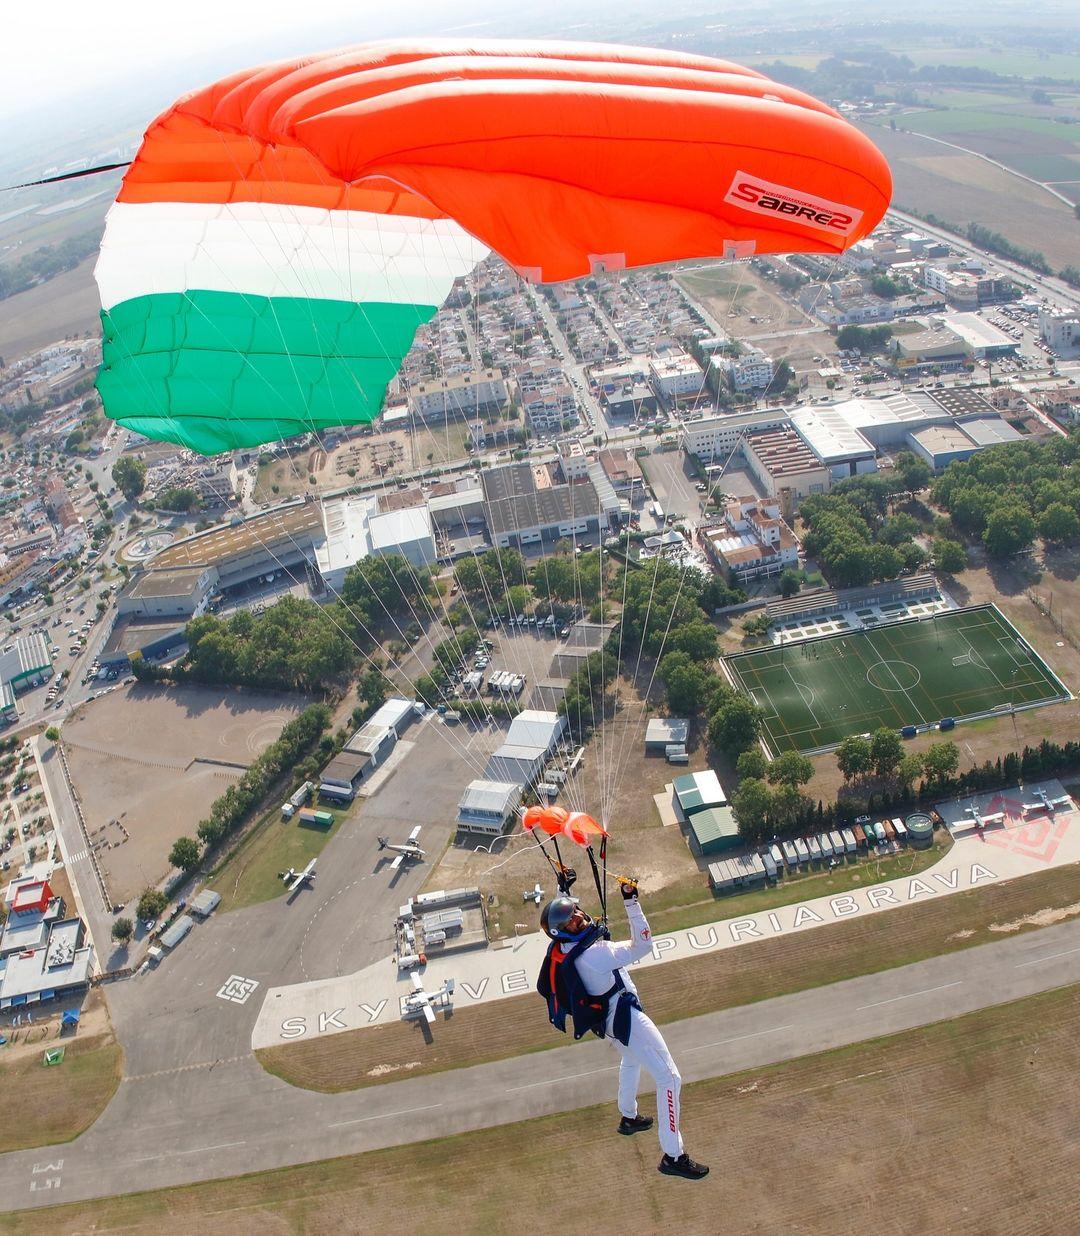 Farhan Akhtar posted a picture of himself skydiving with a tri-coloured parachute and said, 